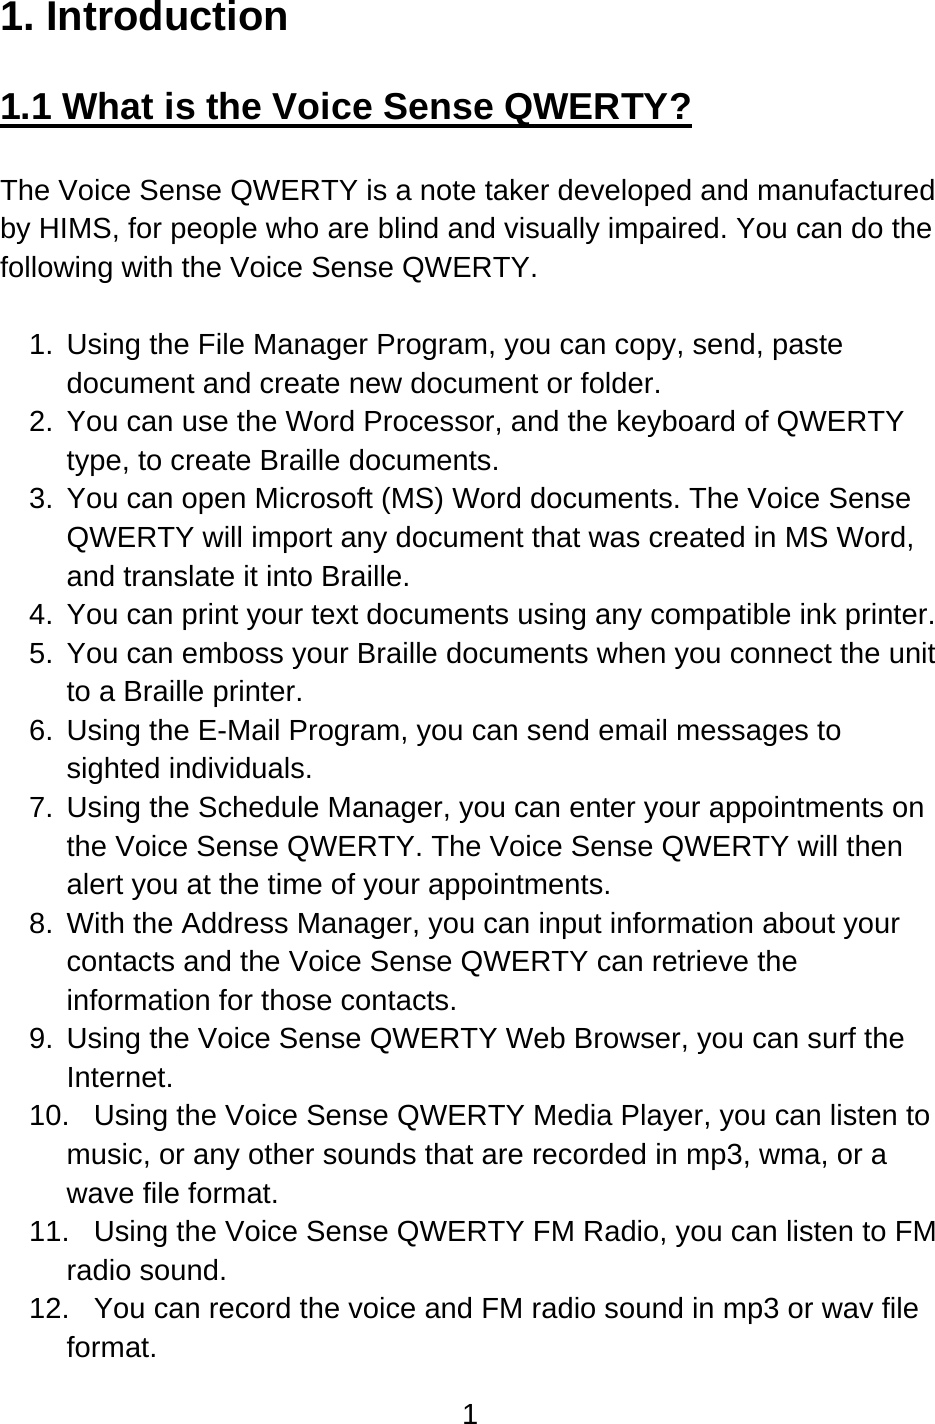 1  1. Introduction  1.1 What is the Voice Sense QWERTY?  The Voice Sense QWERTY is a note taker developed and manufactured by HIMS, for people who are blind and visually impaired. You can do the following with the Voice Sense QWERTY.  1.  Using the File Manager Program, you can copy, send, paste document and create new document or folder. 2.  You can use the Word Processor, and the keyboard of QWERTY type, to create Braille documents. 3.  You can open Microsoft (MS) Word documents. The Voice Sense QWERTY will import any document that was created in MS Word, and translate it into Braille. 4.  You can print your text documents using any compatible ink printer. 5.  You can emboss your Braille documents when you connect the unit to a Braille printer. 6.  Using the E-Mail Program, you can send email messages to sighted individuals. 7.  Using the Schedule Manager, you can enter your appointments on the Voice Sense QWERTY. The Voice Sense QWERTY will then alert you at the time of your appointments. 8.  With the Address Manager, you can input information about your contacts and the Voice Sense QWERTY can retrieve the information for those contacts. 9.  Using the Voice Sense QWERTY Web Browser, you can surf the Internet. 10.  Using the Voice Sense QWERTY Media Player, you can listen to music, or any other sounds that are recorded in mp3, wma, or a wave file format. 11.  Using the Voice Sense QWERTY FM Radio, you can listen to FM radio sound. 12.  You can record the voice and FM radio sound in mp3 or wav file format. 